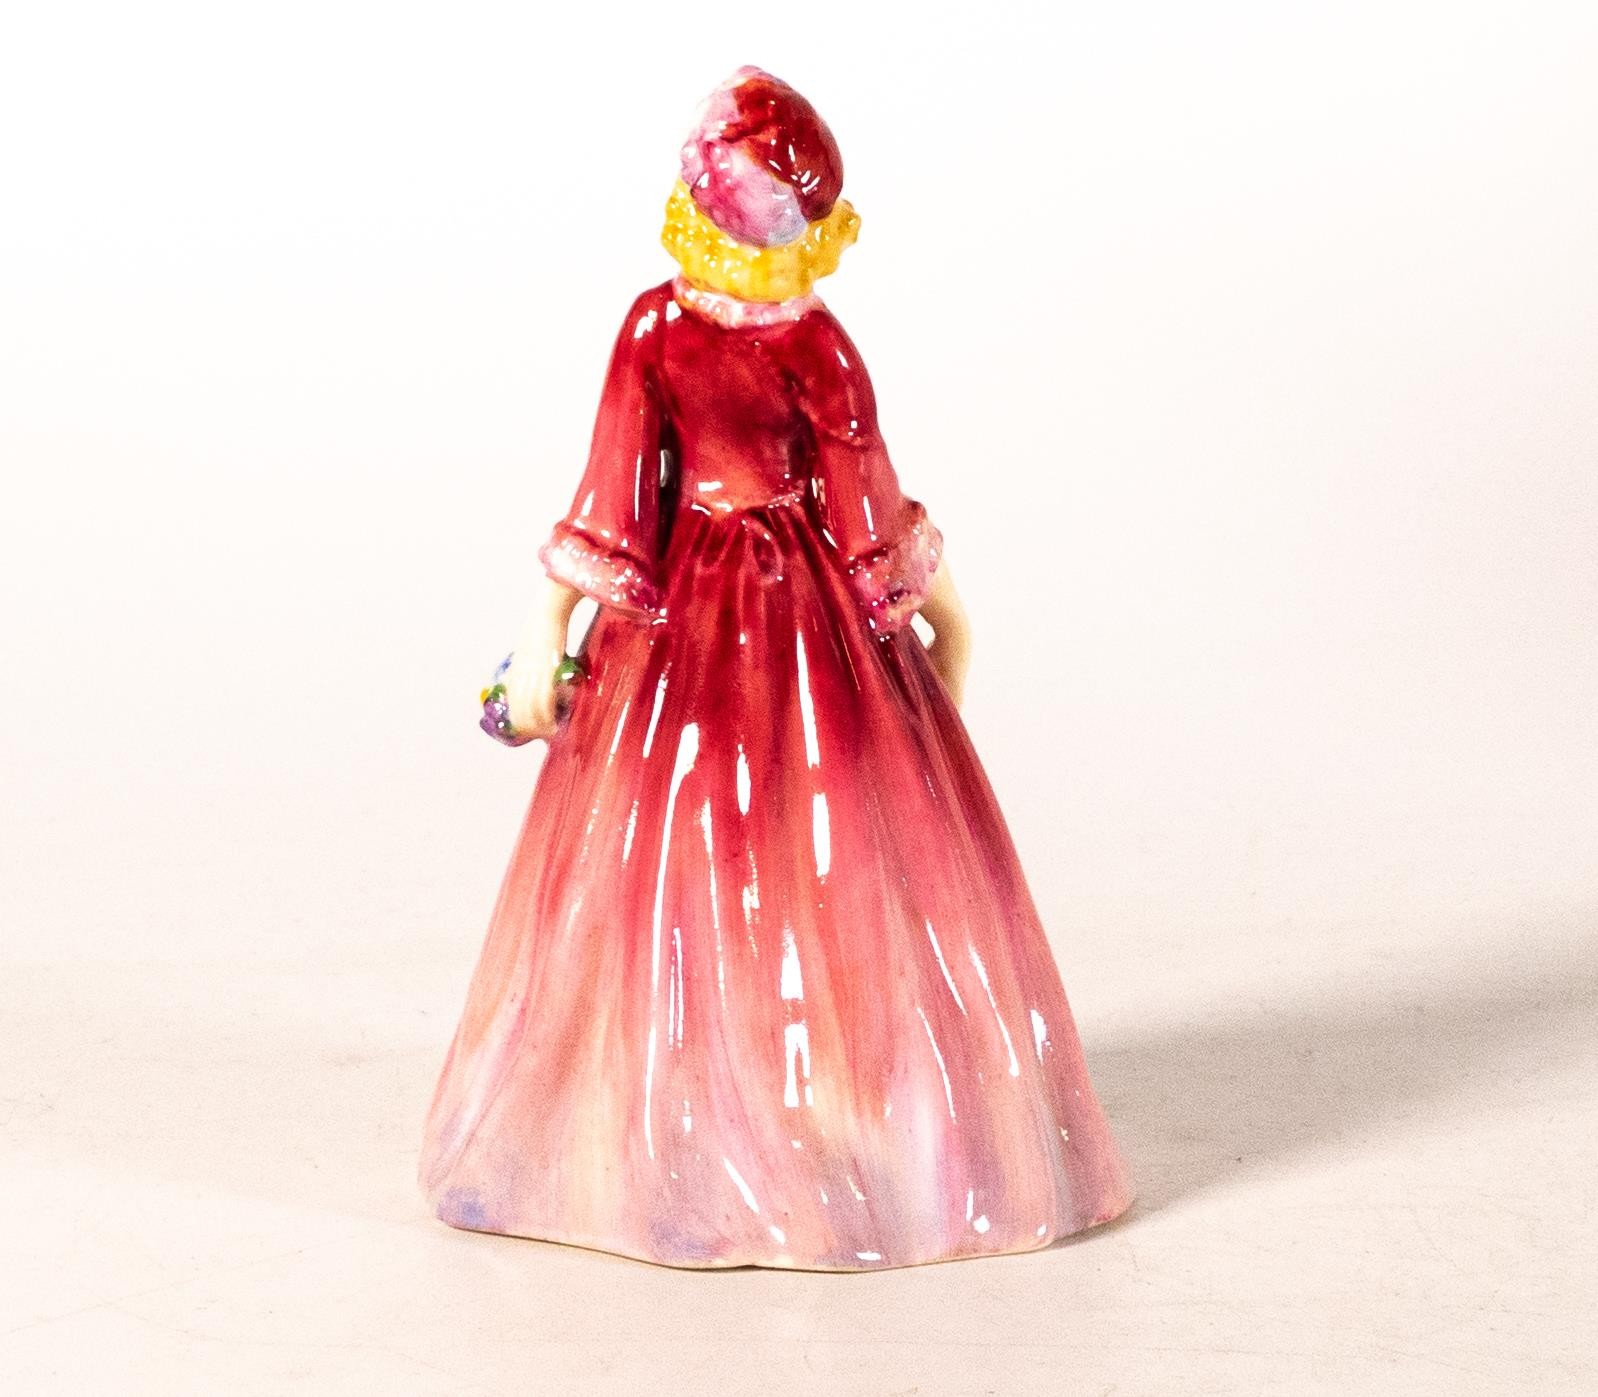 Royal Doulton early miniature figure Rosamund M33, in red colourway, h.11cm. - Image 2 of 3